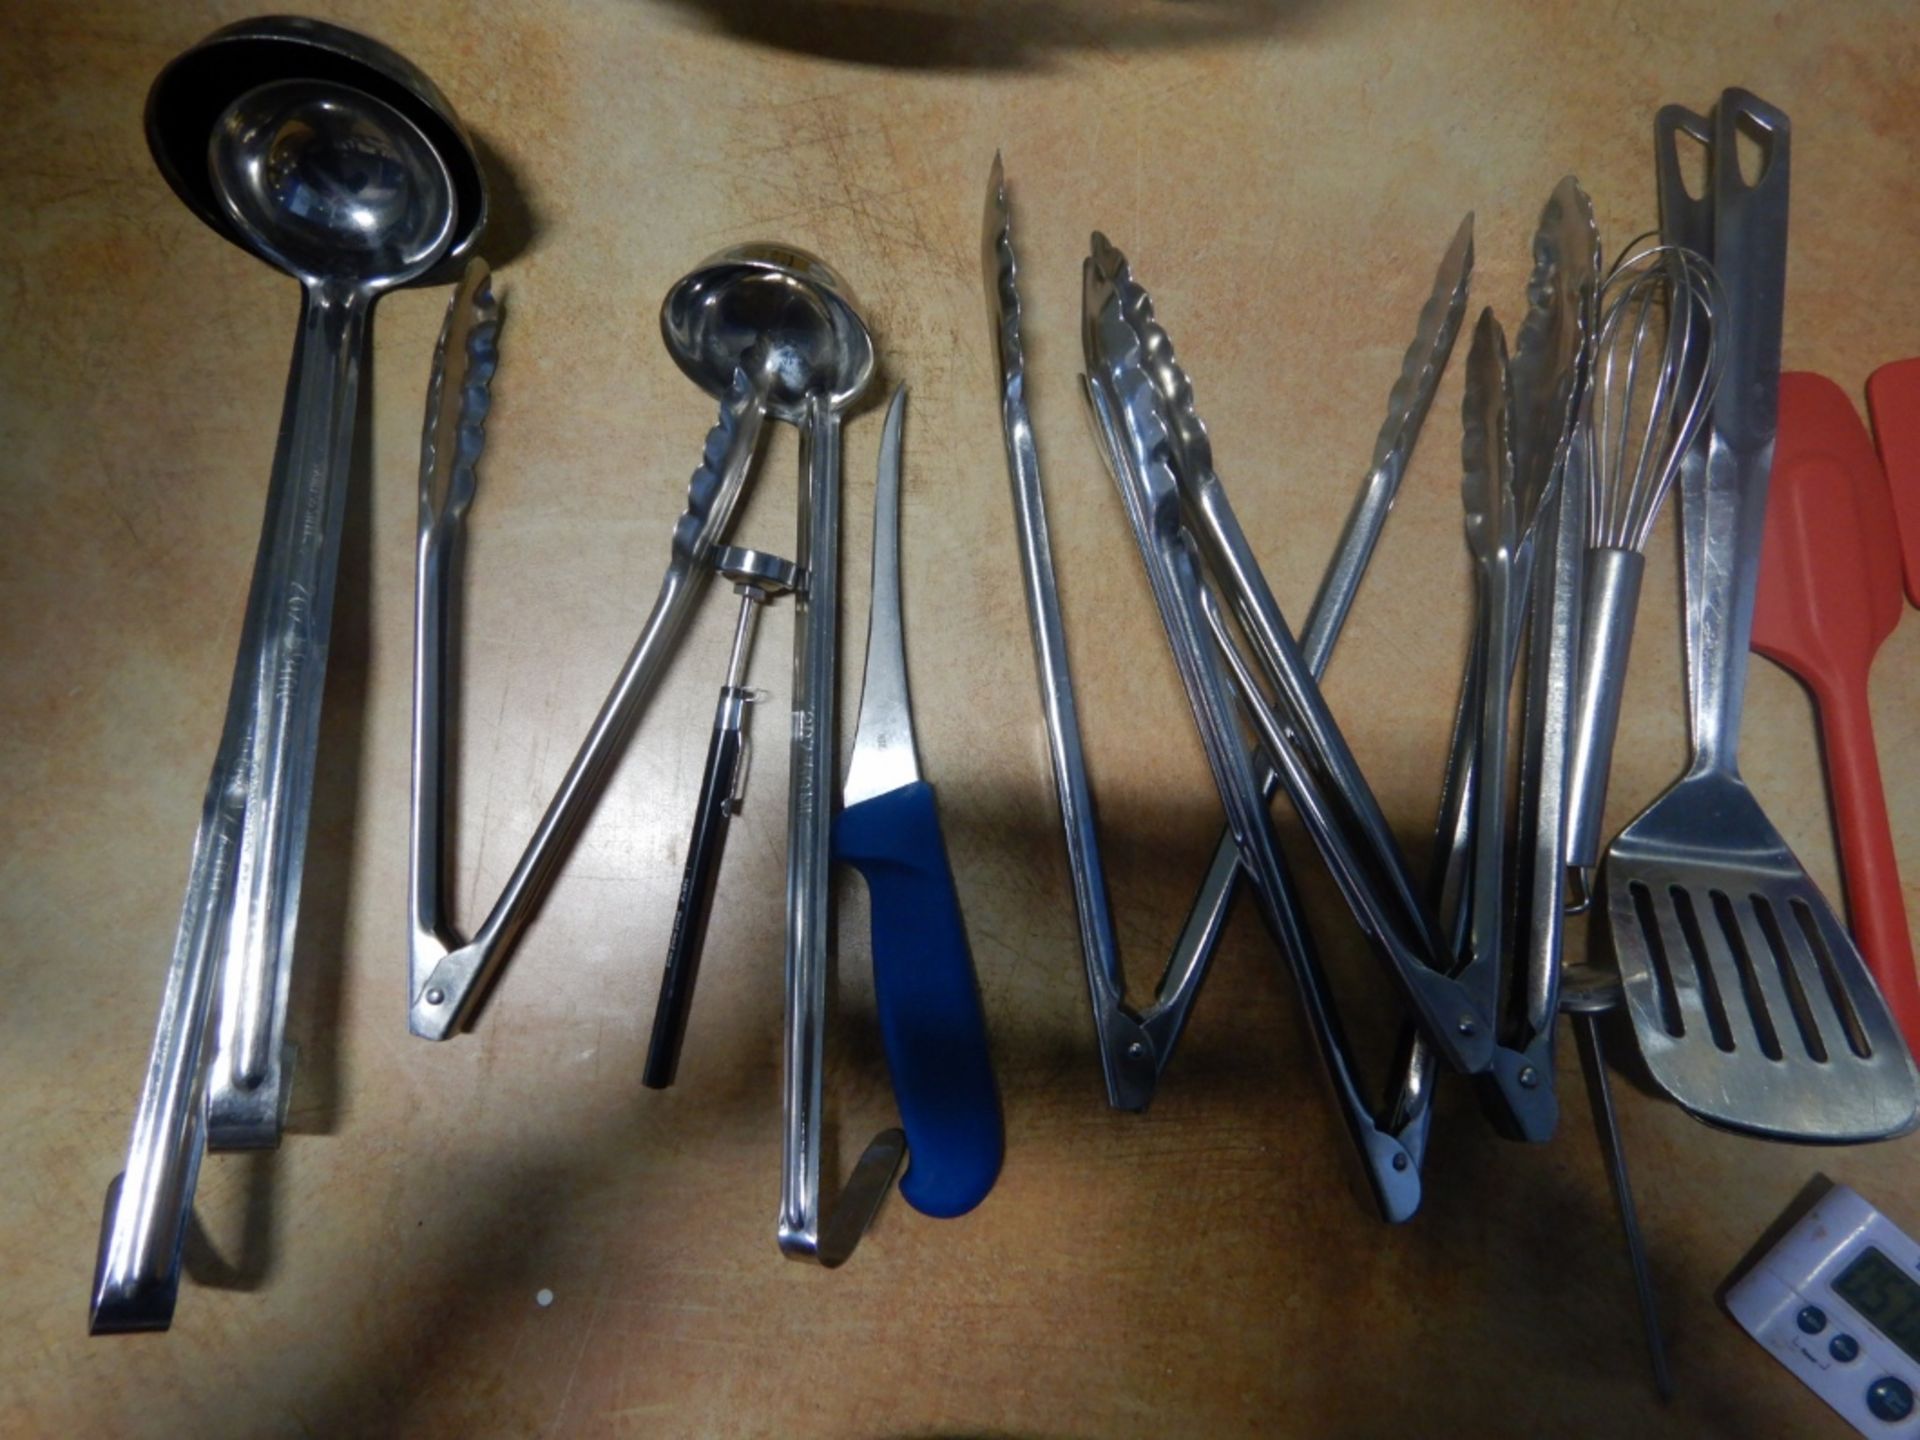 L/O ASSORTED SERVING SPOONS, SHARPENING STONES, MIXERS, ICE CREAM SCOOP, ETC. - Image 5 of 7